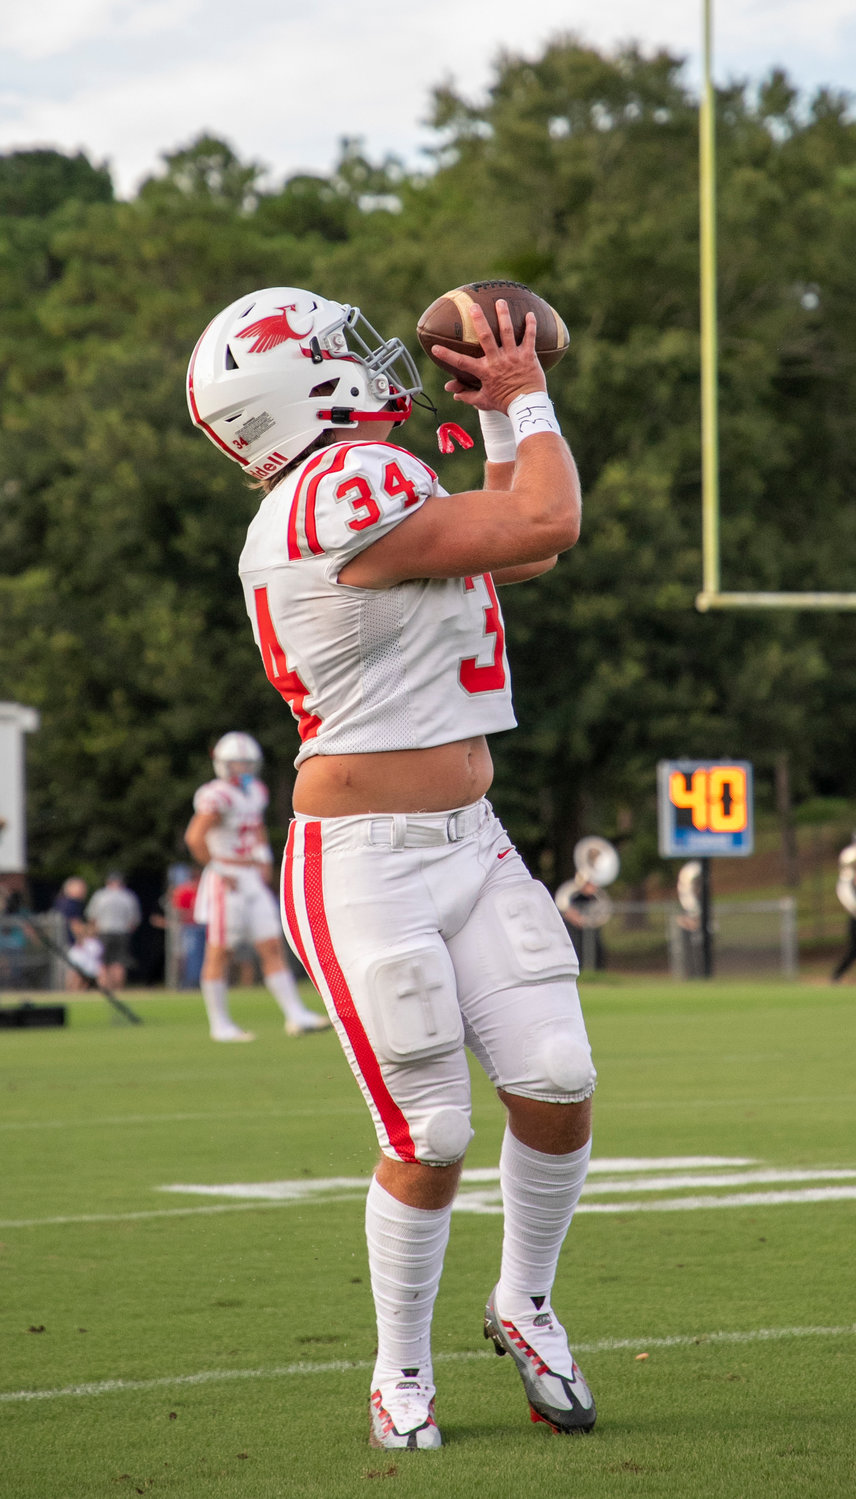 St. Michael’s Tyler Cella catches a pass in warmups before the season-opening contest against Gulf Shores at home Aug. 18. The senior linebacker was one of two Cardinals named all-state by the Alabama Sports Writers Association.